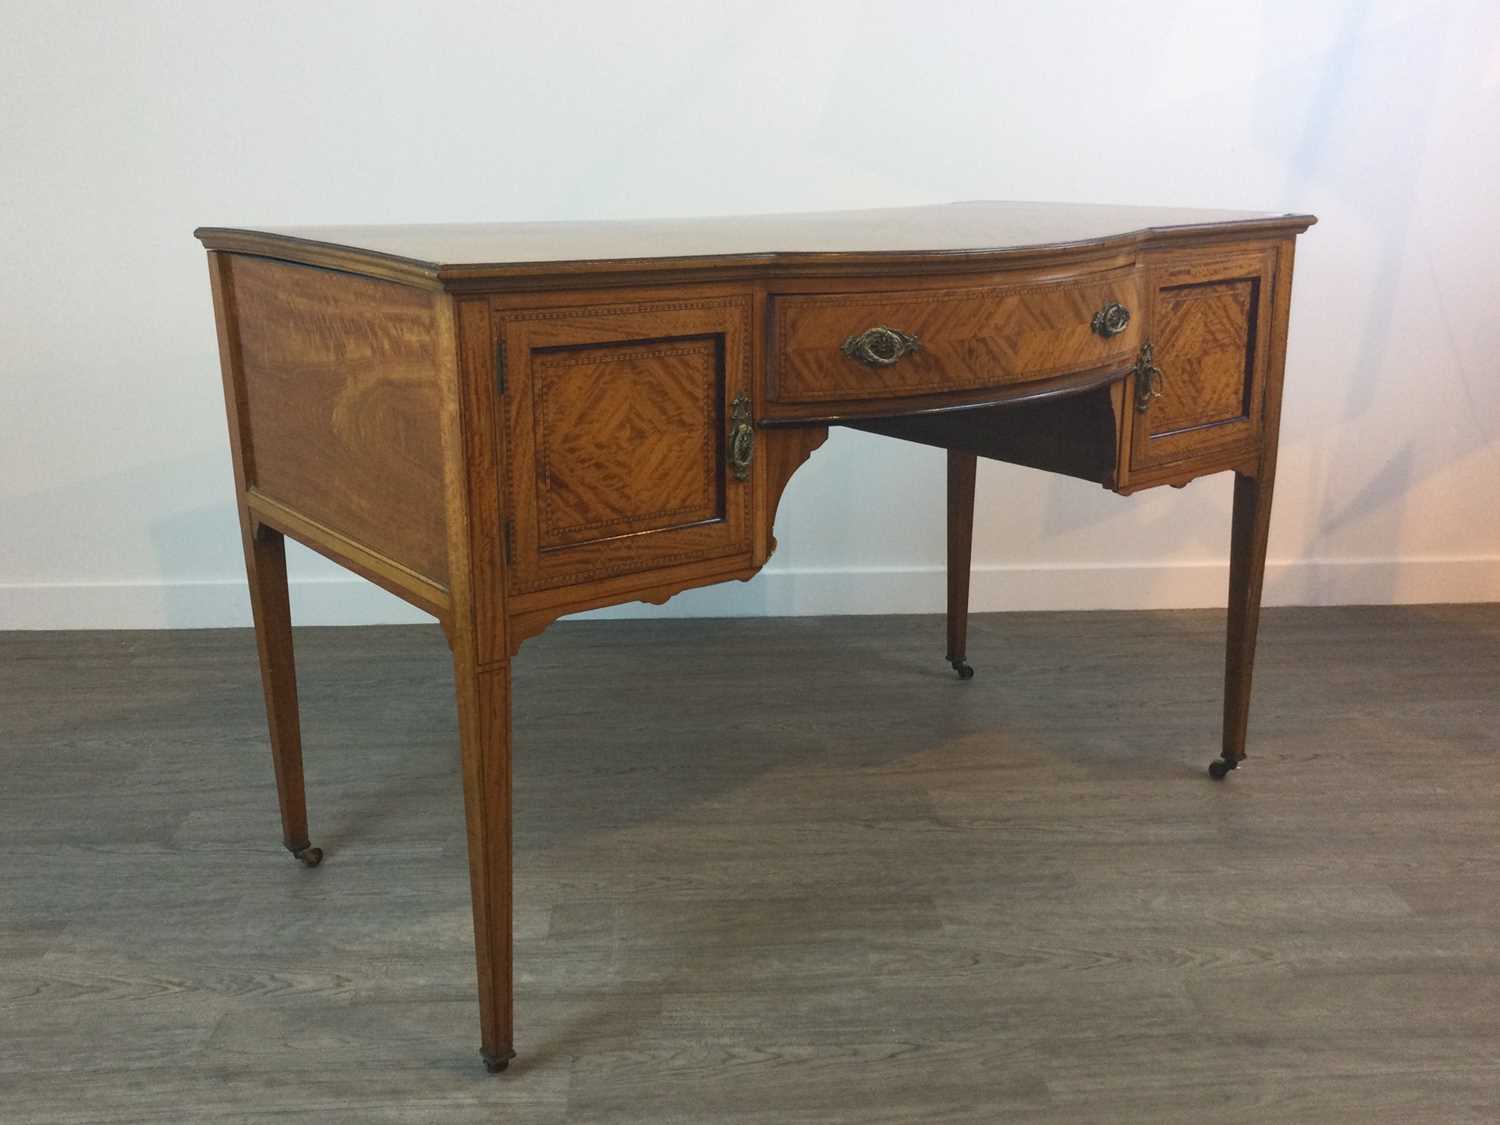 Lot 718 - A SATINWOOD SIDE TABLE